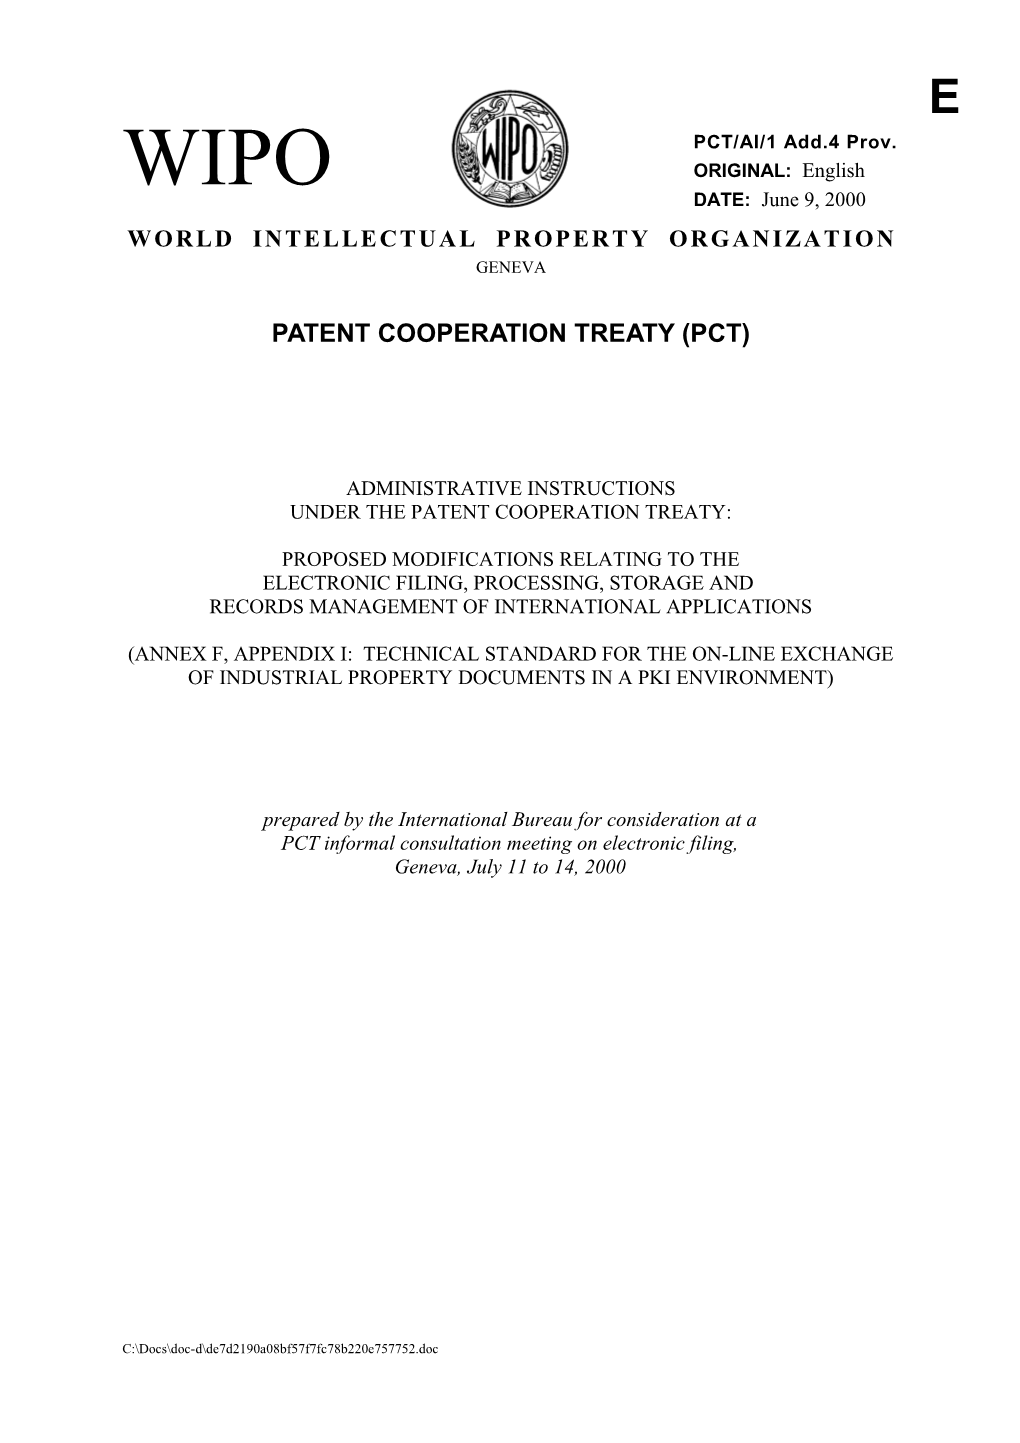 PCT/AI/1 ADD.4 PROV.: Administrative Instructions Under the Patent Cooperation Treaty (Proposed